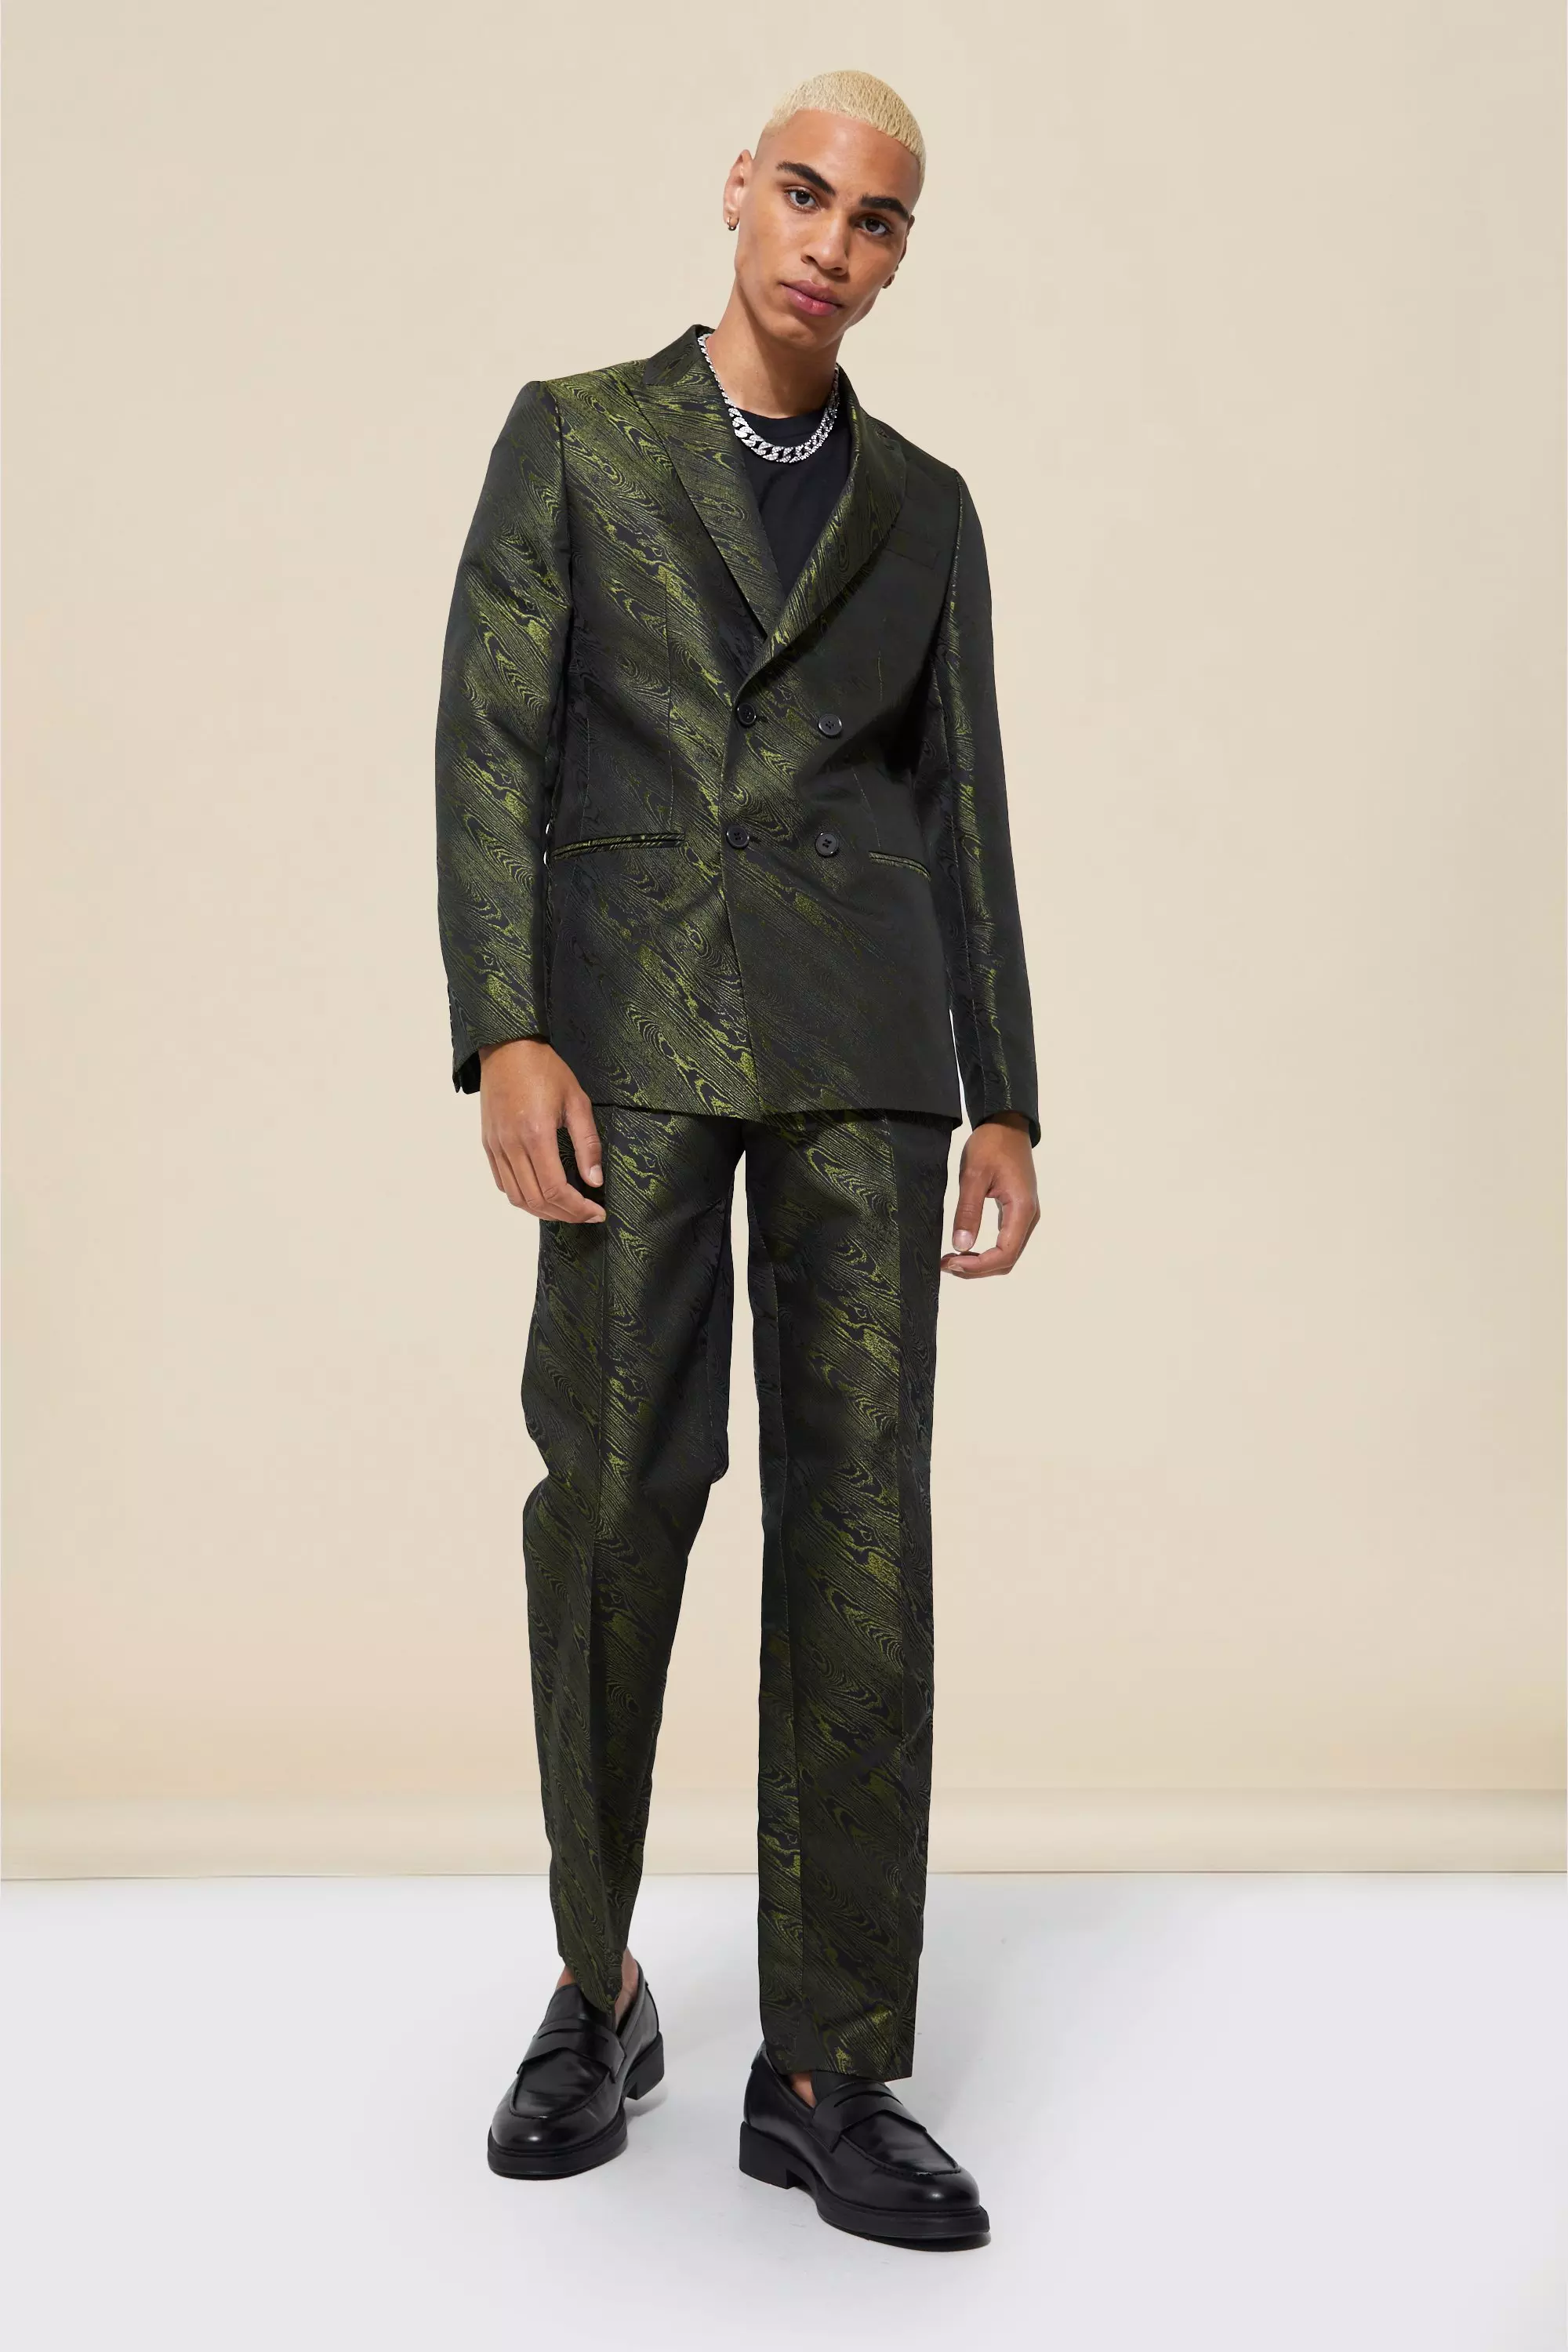 Js Prom Outfit For Male | tunersread.com